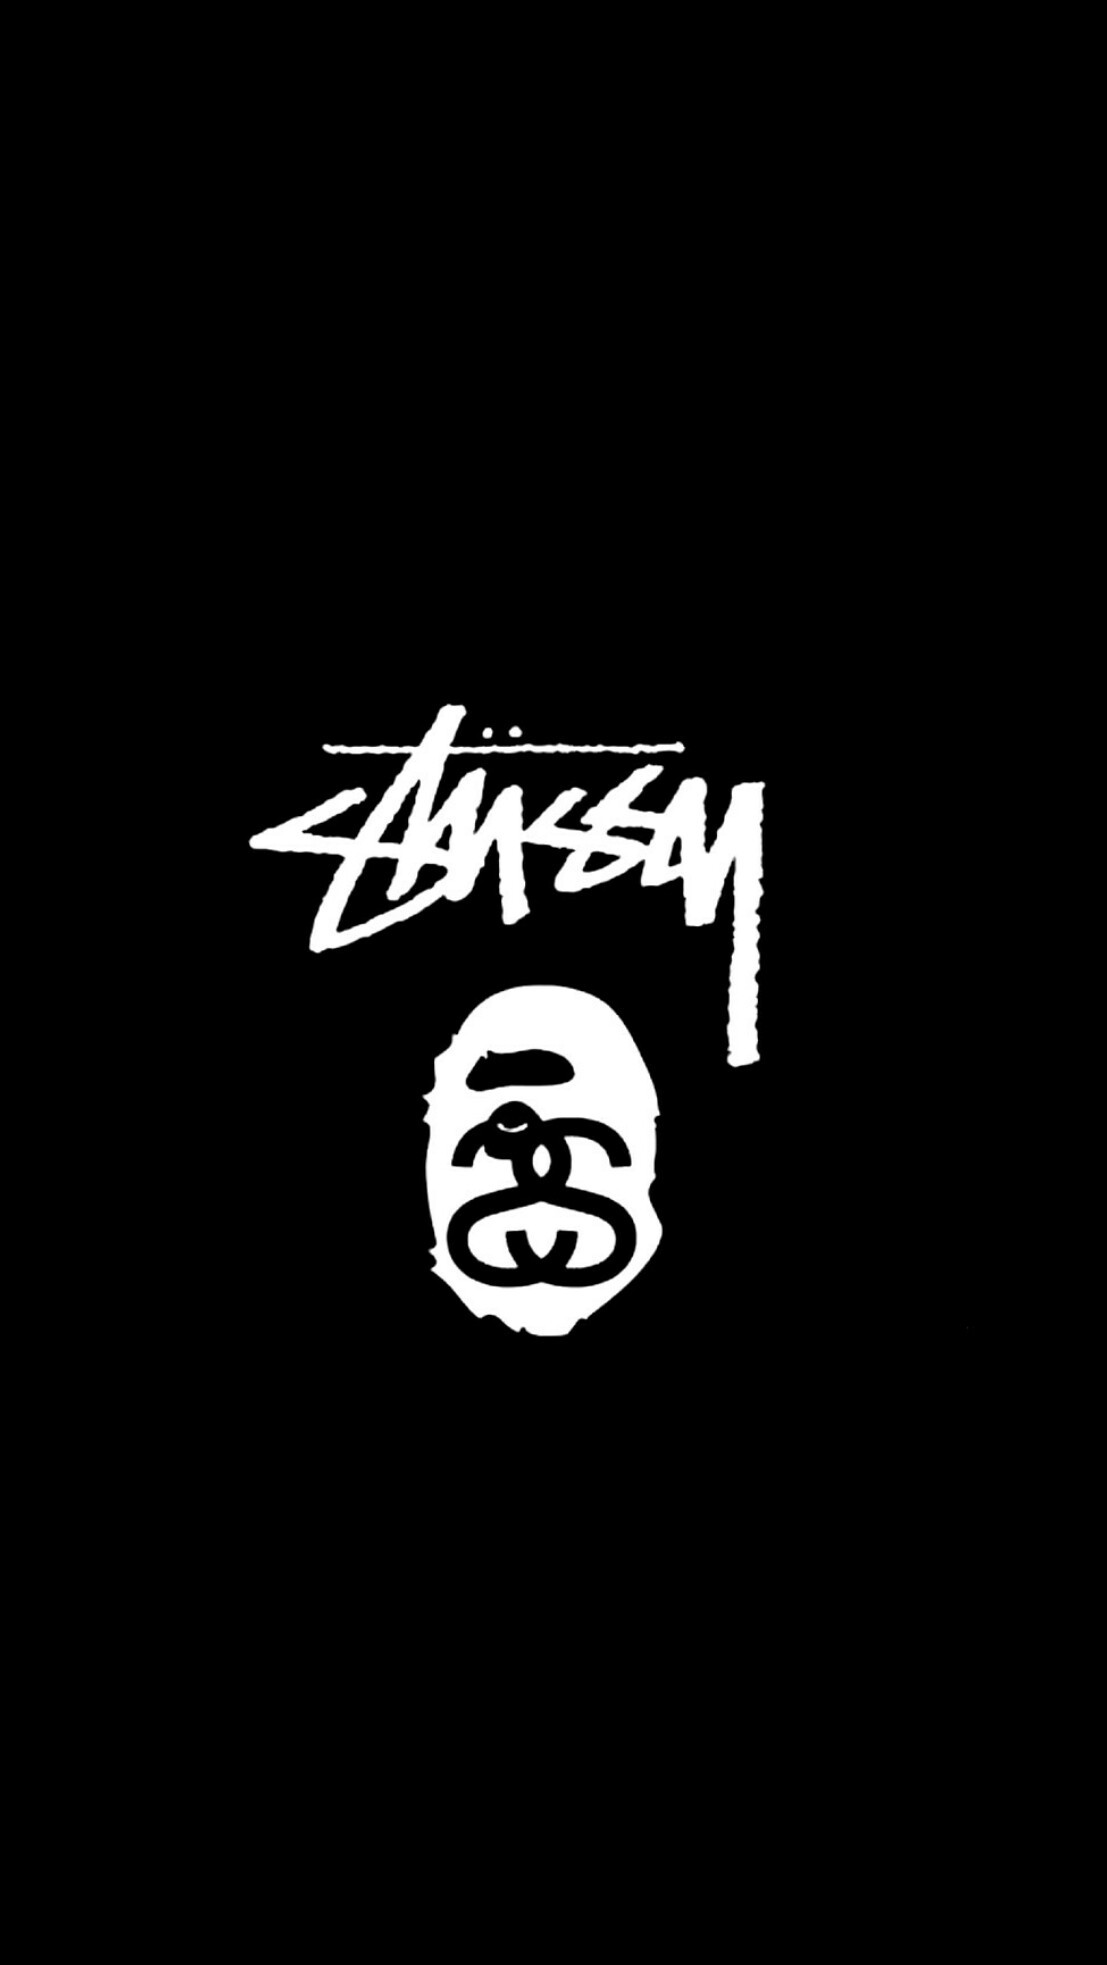 #samsung #edge #s6 #stussy #black #wallpaper #android #iphone